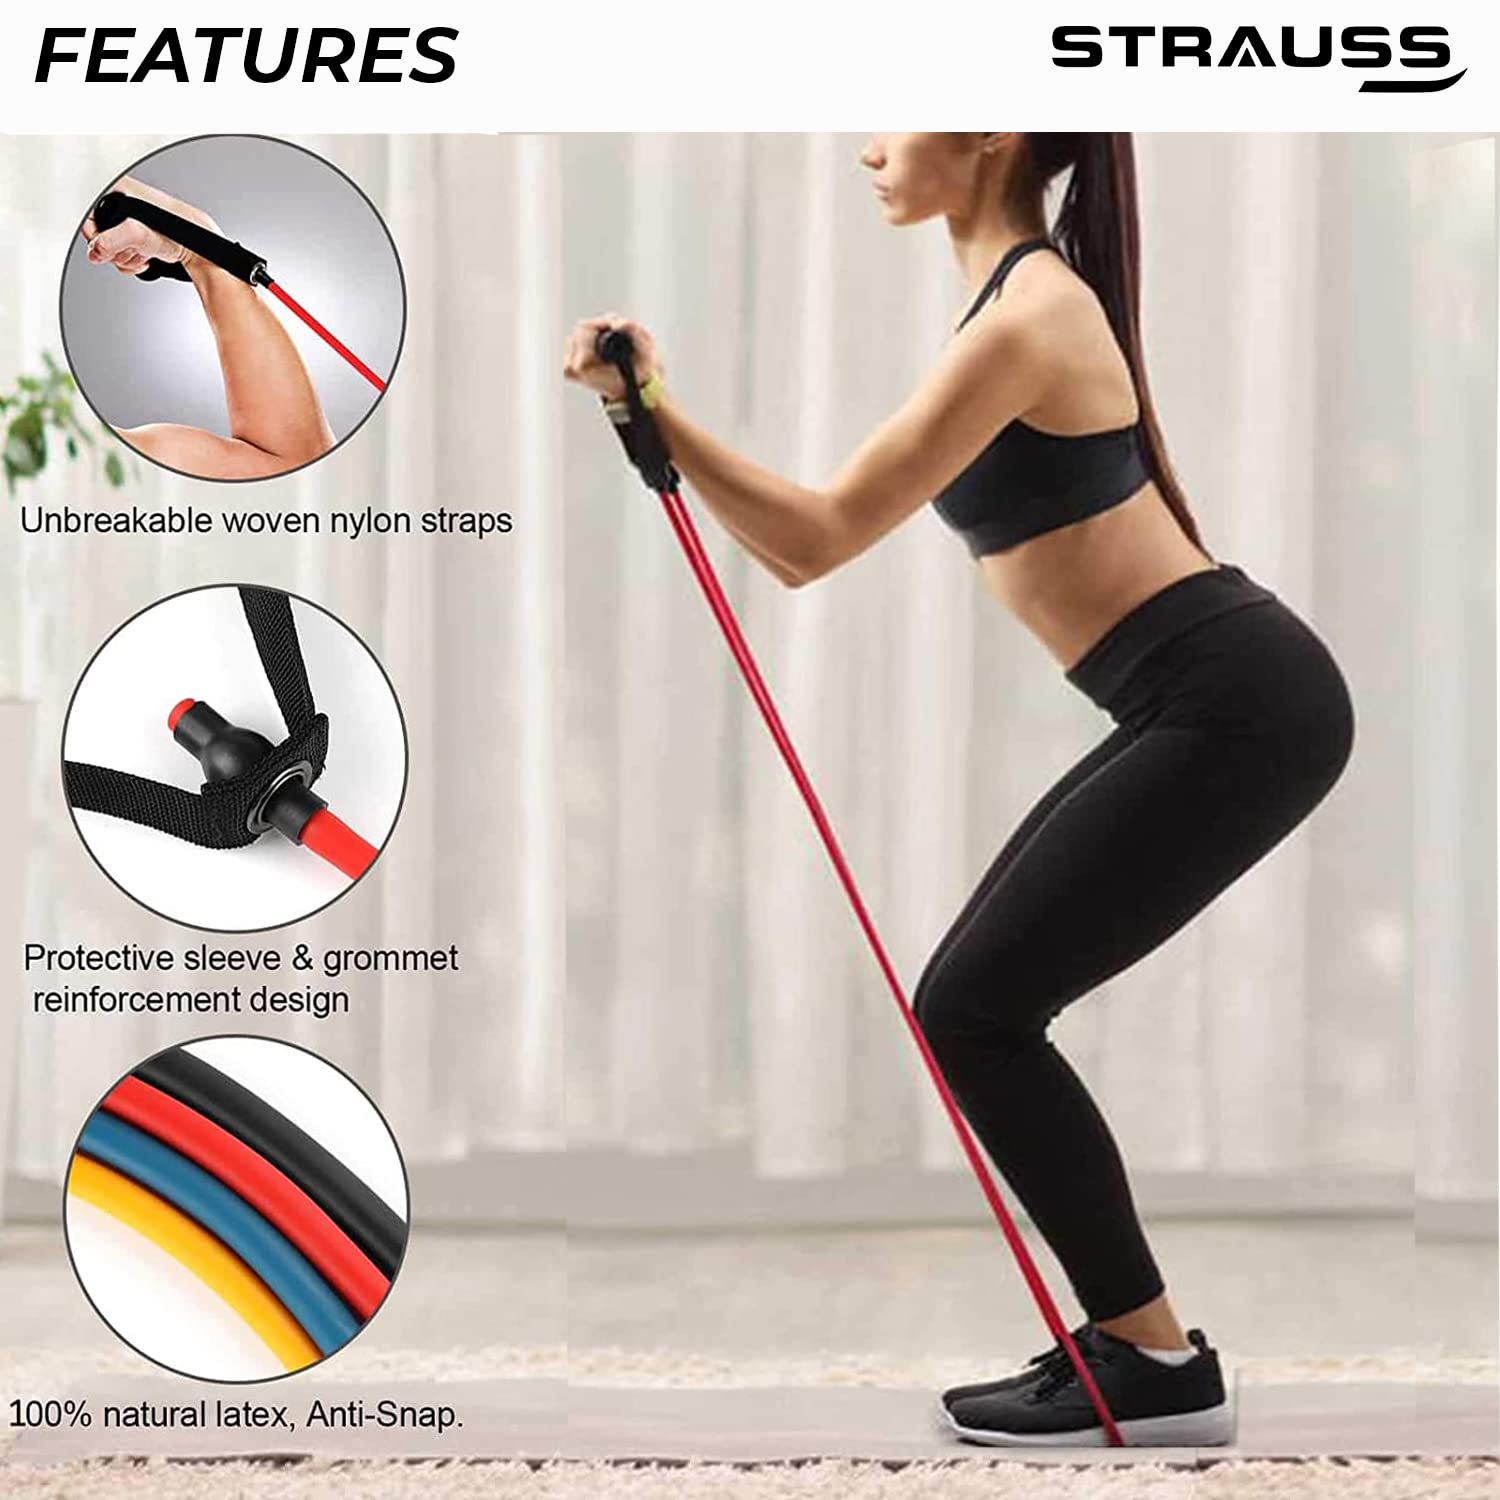 Strauss Double Resistance Tube with PVC Handles, Door Knob & Carry Bag | Double Toning Tube for Stretching, Workout, Home Gym and Toning with Heavy Quality D Shaped Handles | 18 Kg, (Red)